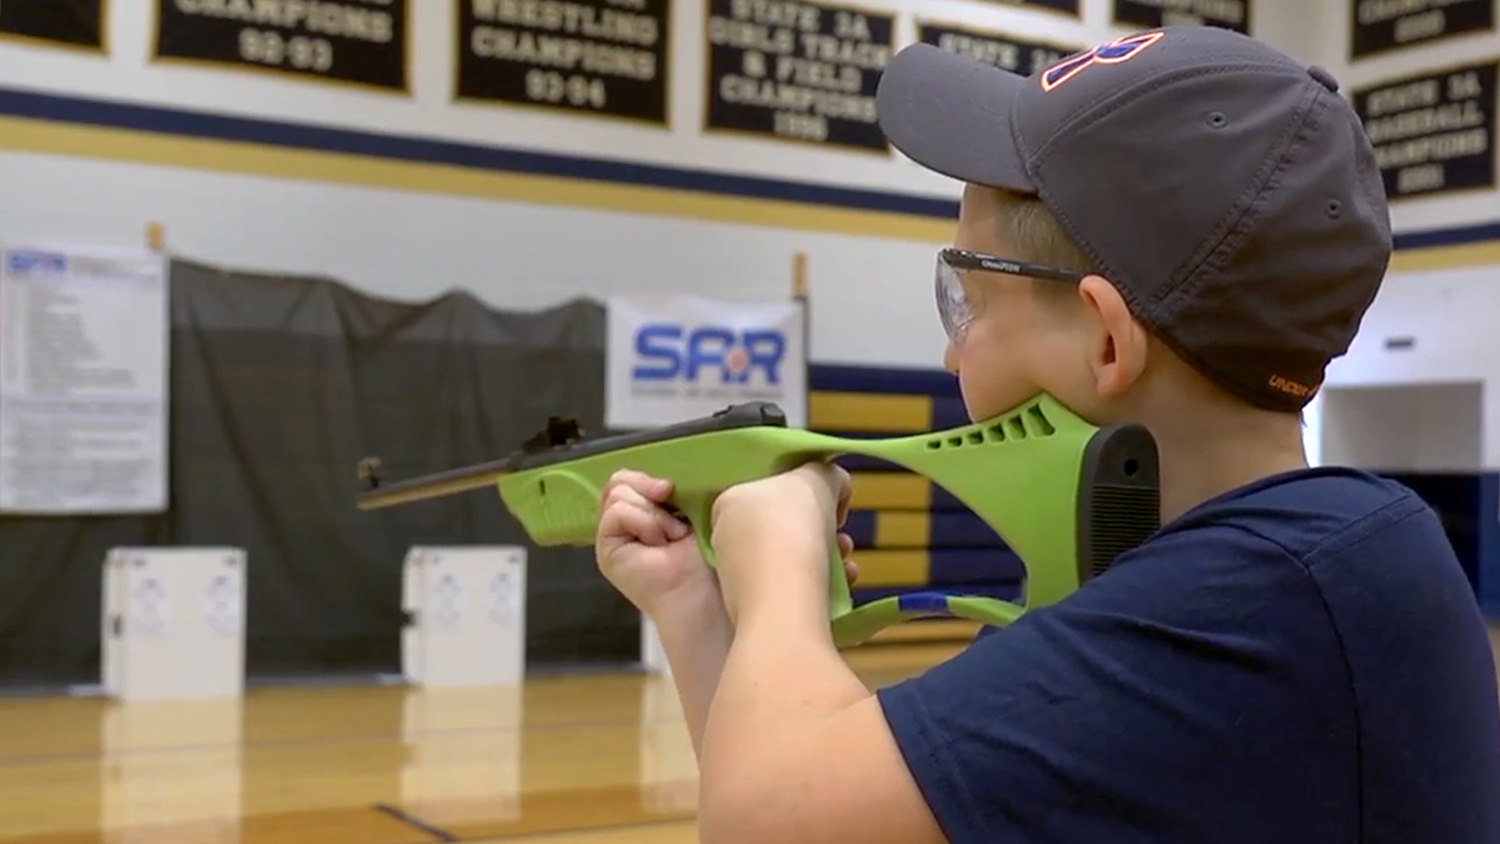 Student air rifle program competitor practicing in a Missouri h.s. gymnasium